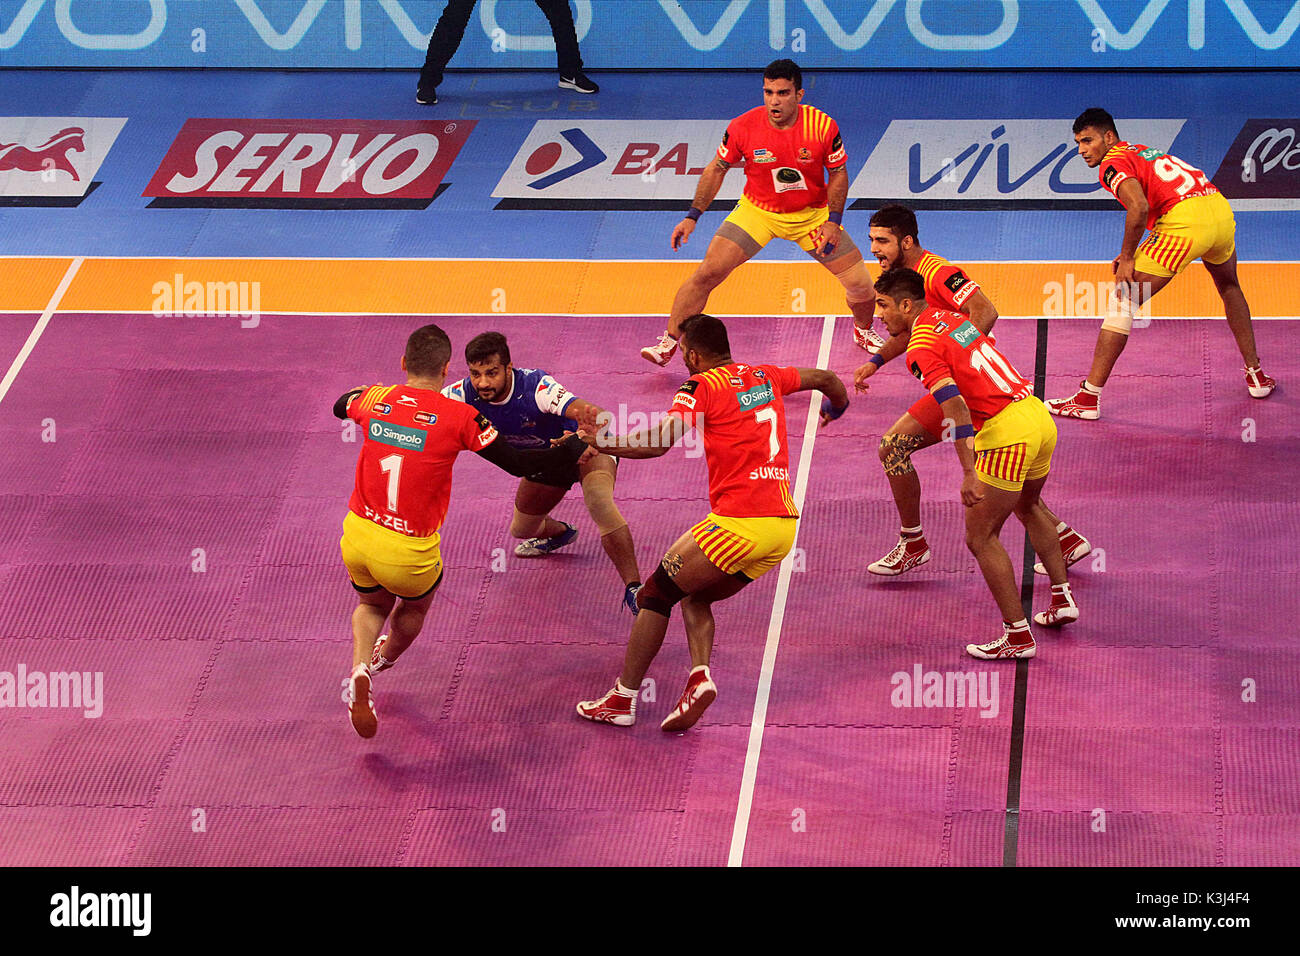 Kolkata, India. 02nd Sep, 2017. Gujarat Fortune Giants (orange jersey) and Haryana Steelers (blue jersey) players in action during the Pro Kabaddi League match. Credit: Saikat Paul/Pacific Press/Alamy Live News Stock Photo